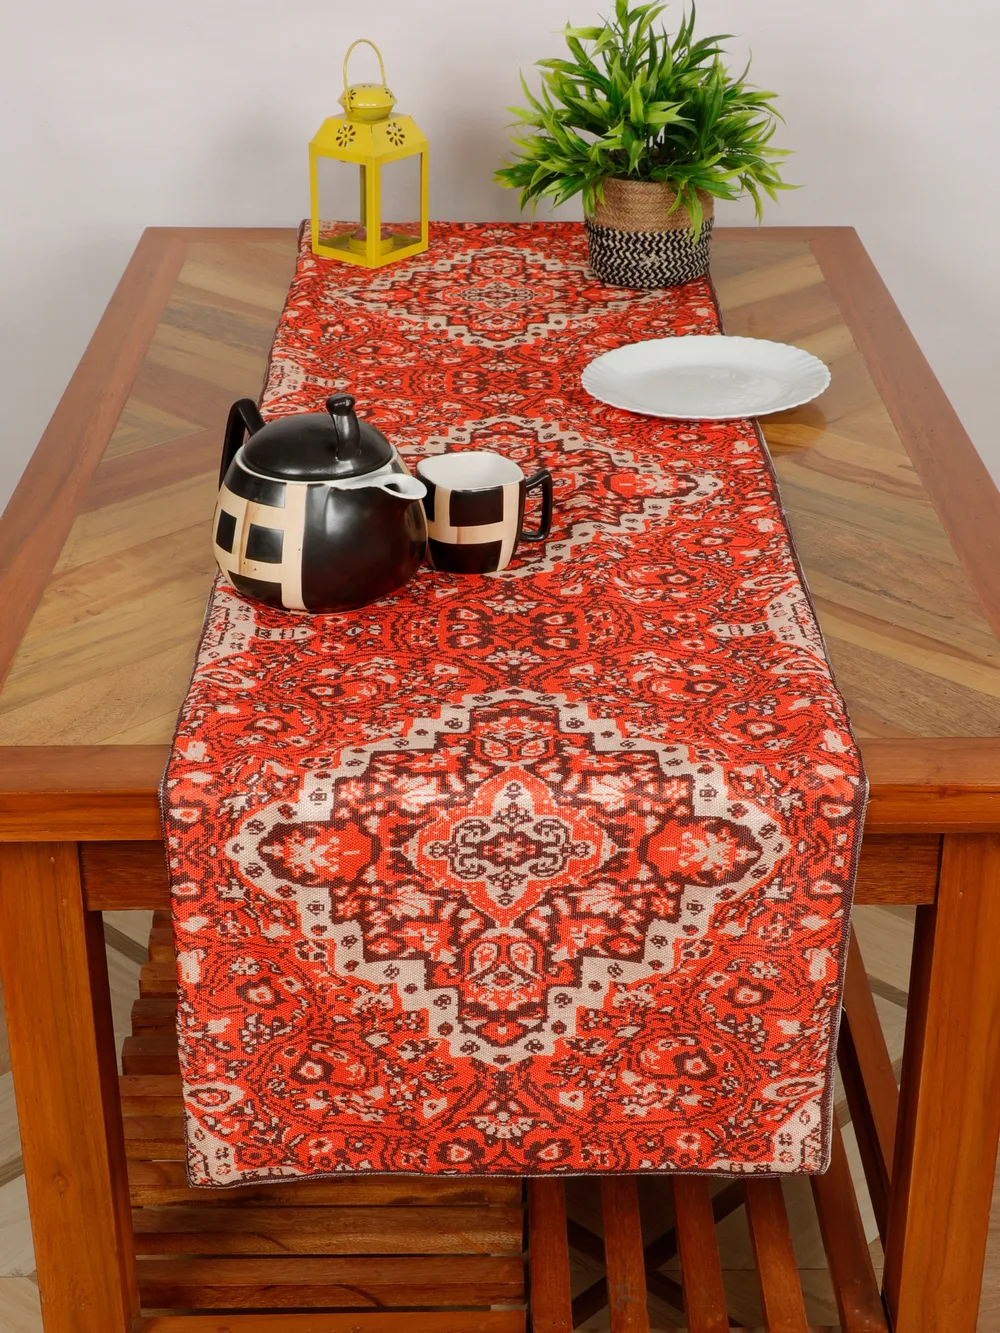 Cotton polyester printed table runner, abstract, diamond, 54x14, orange, cream, brown